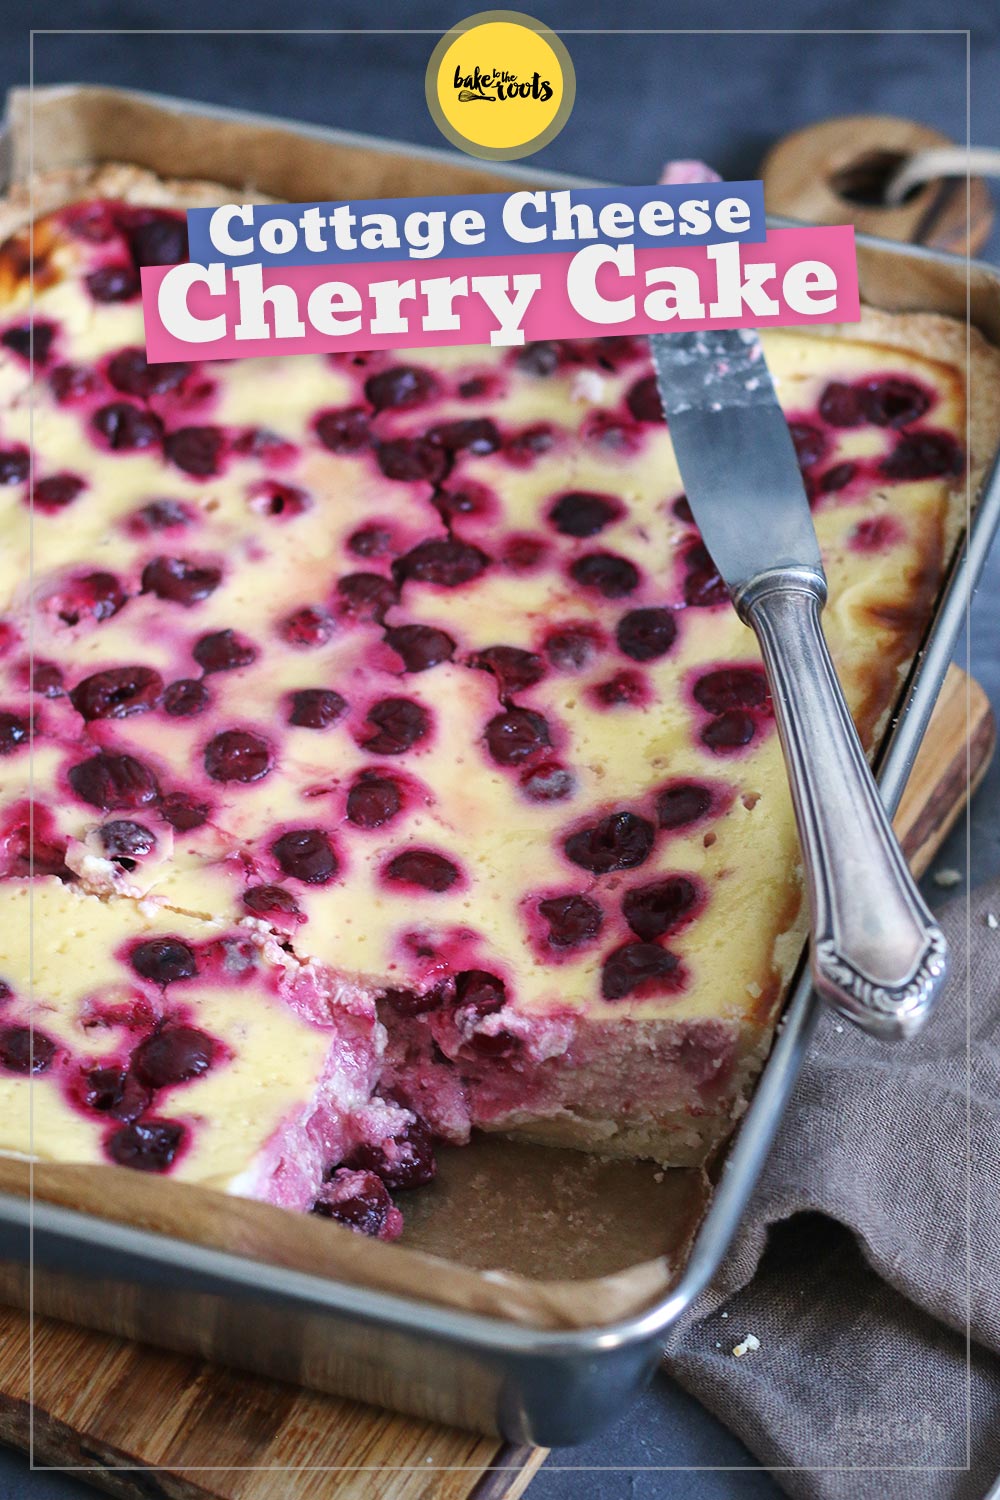 Cottage Cheese Cherry Cake | Bake to the roots